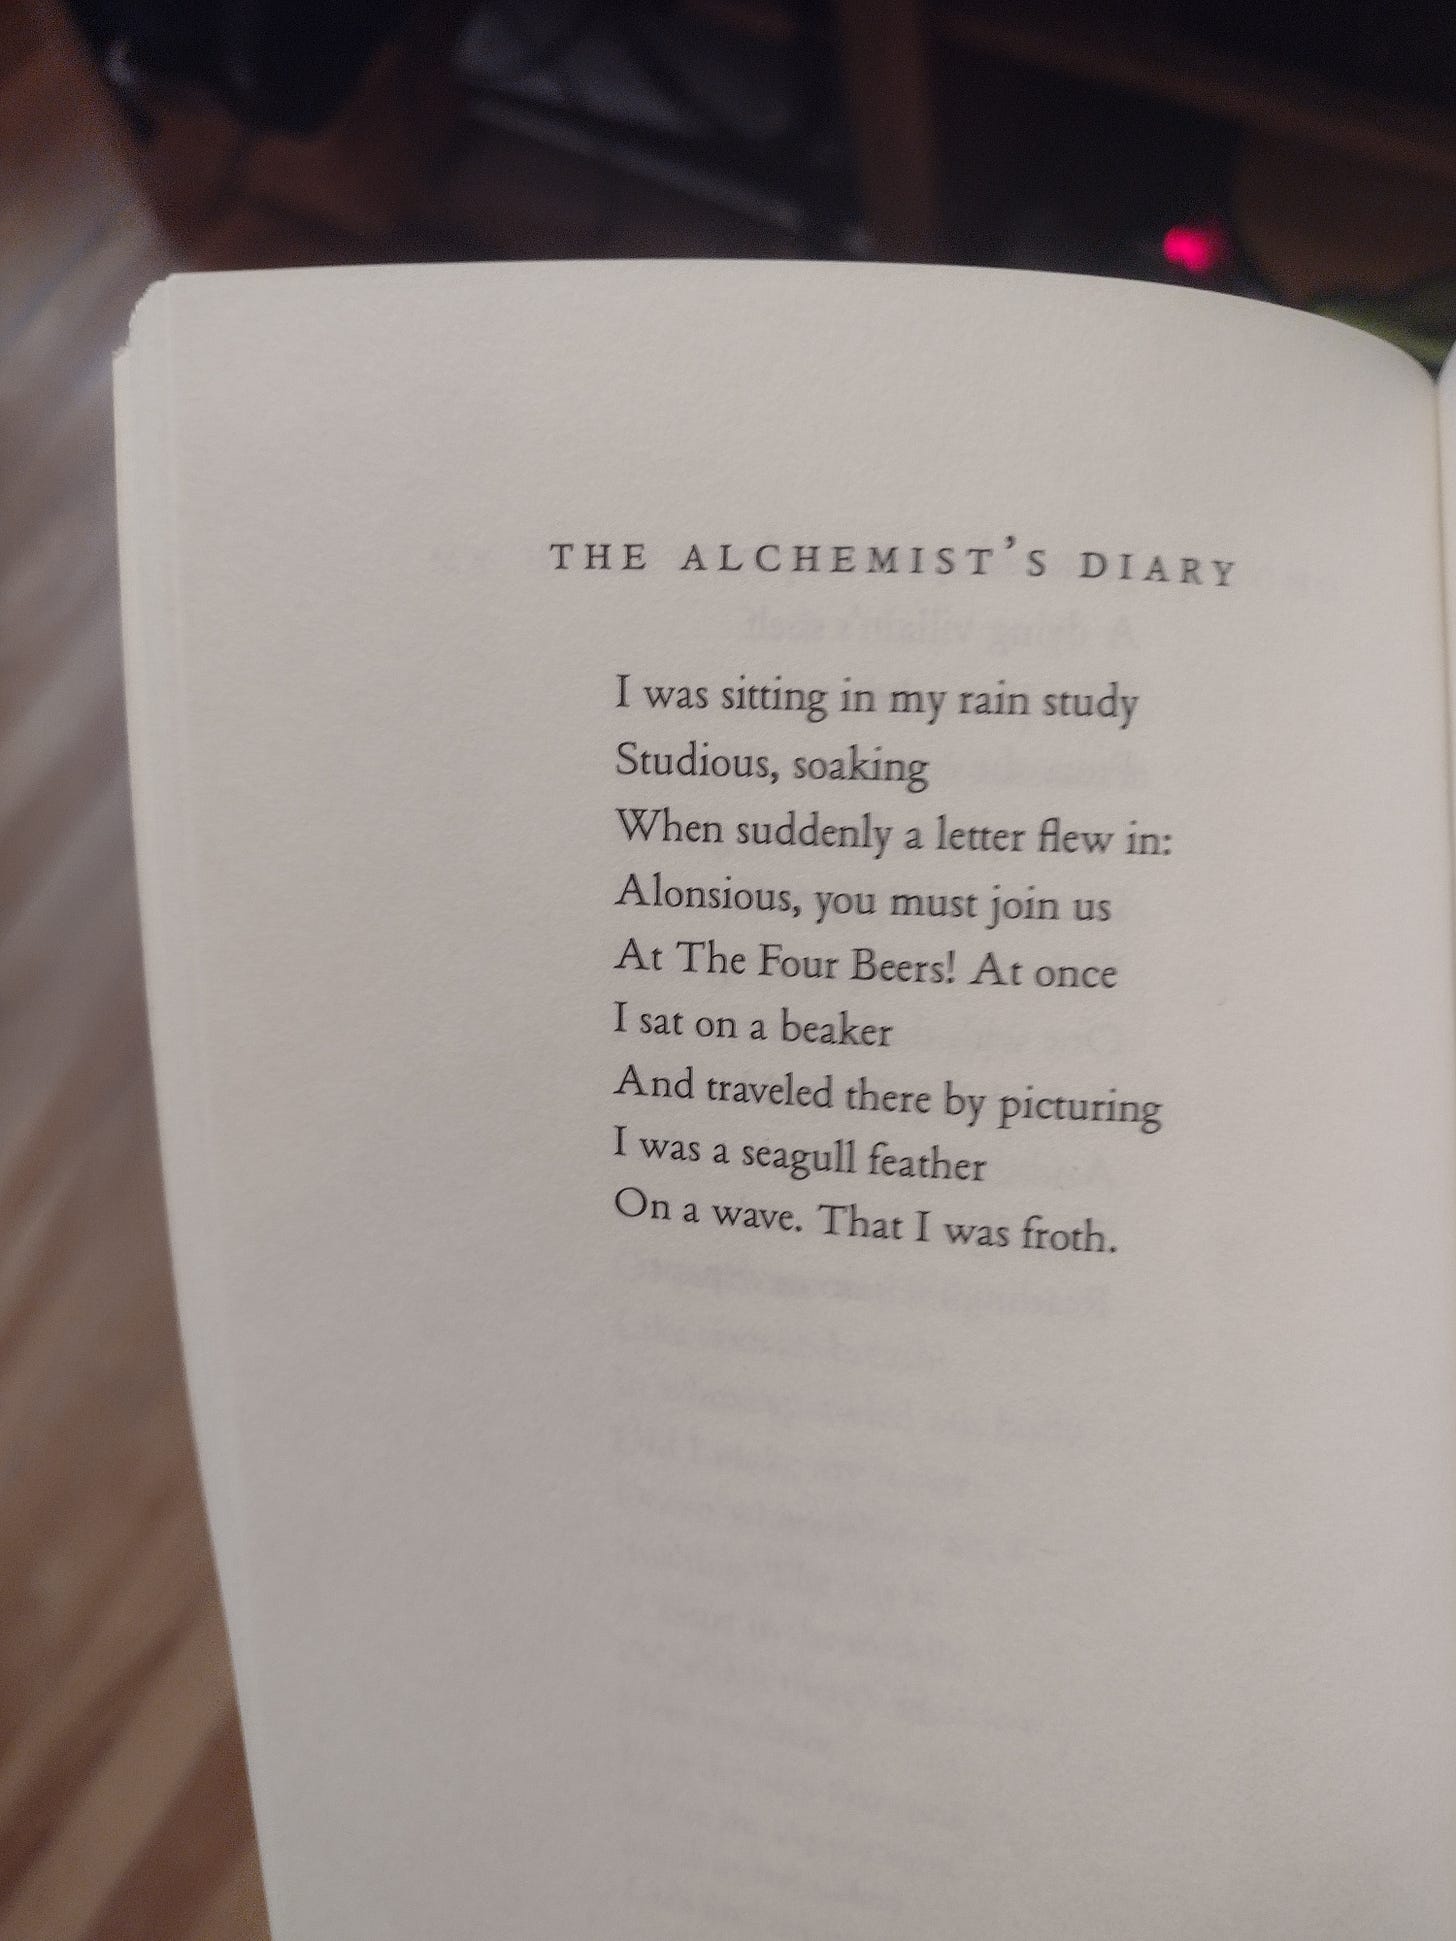 THE ALCHEMIST'S DIARY / “I was sitting in my rain study / Studious, soaking / When suddenly a letter flew in: / Alonsious, you must join us / at the Four Beers! At once / I sat on a beaker / And traveled there by picturing / I was a seagull feather / On a wave. That I was froth."